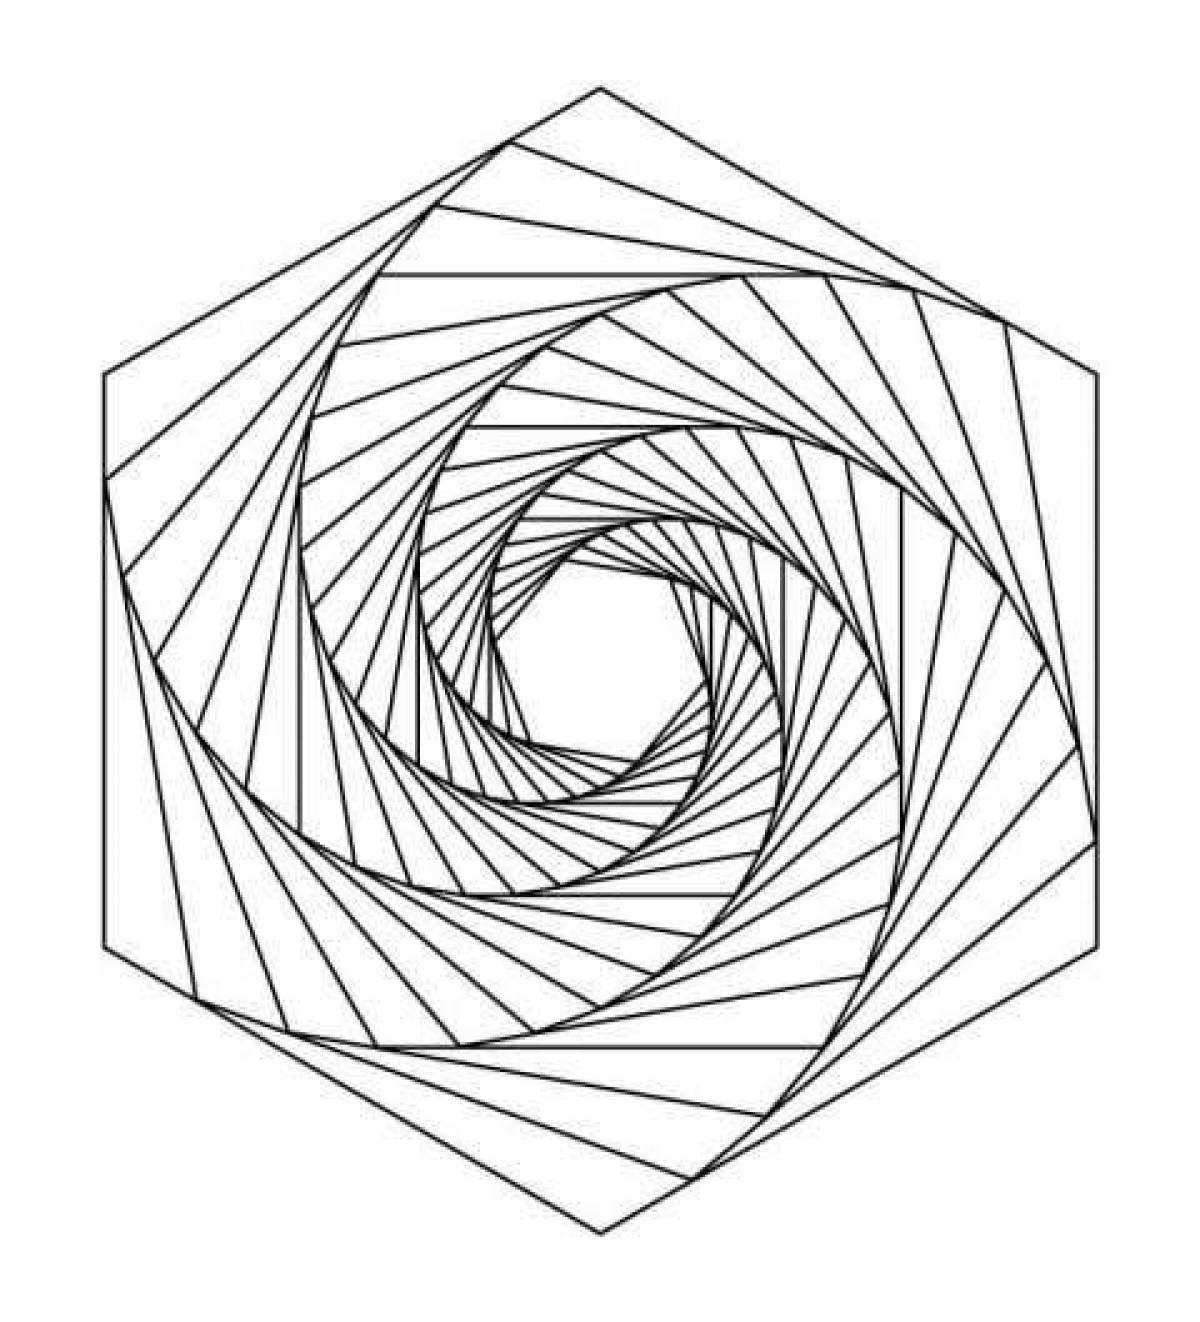 A fascinating spiral to create a coloring page